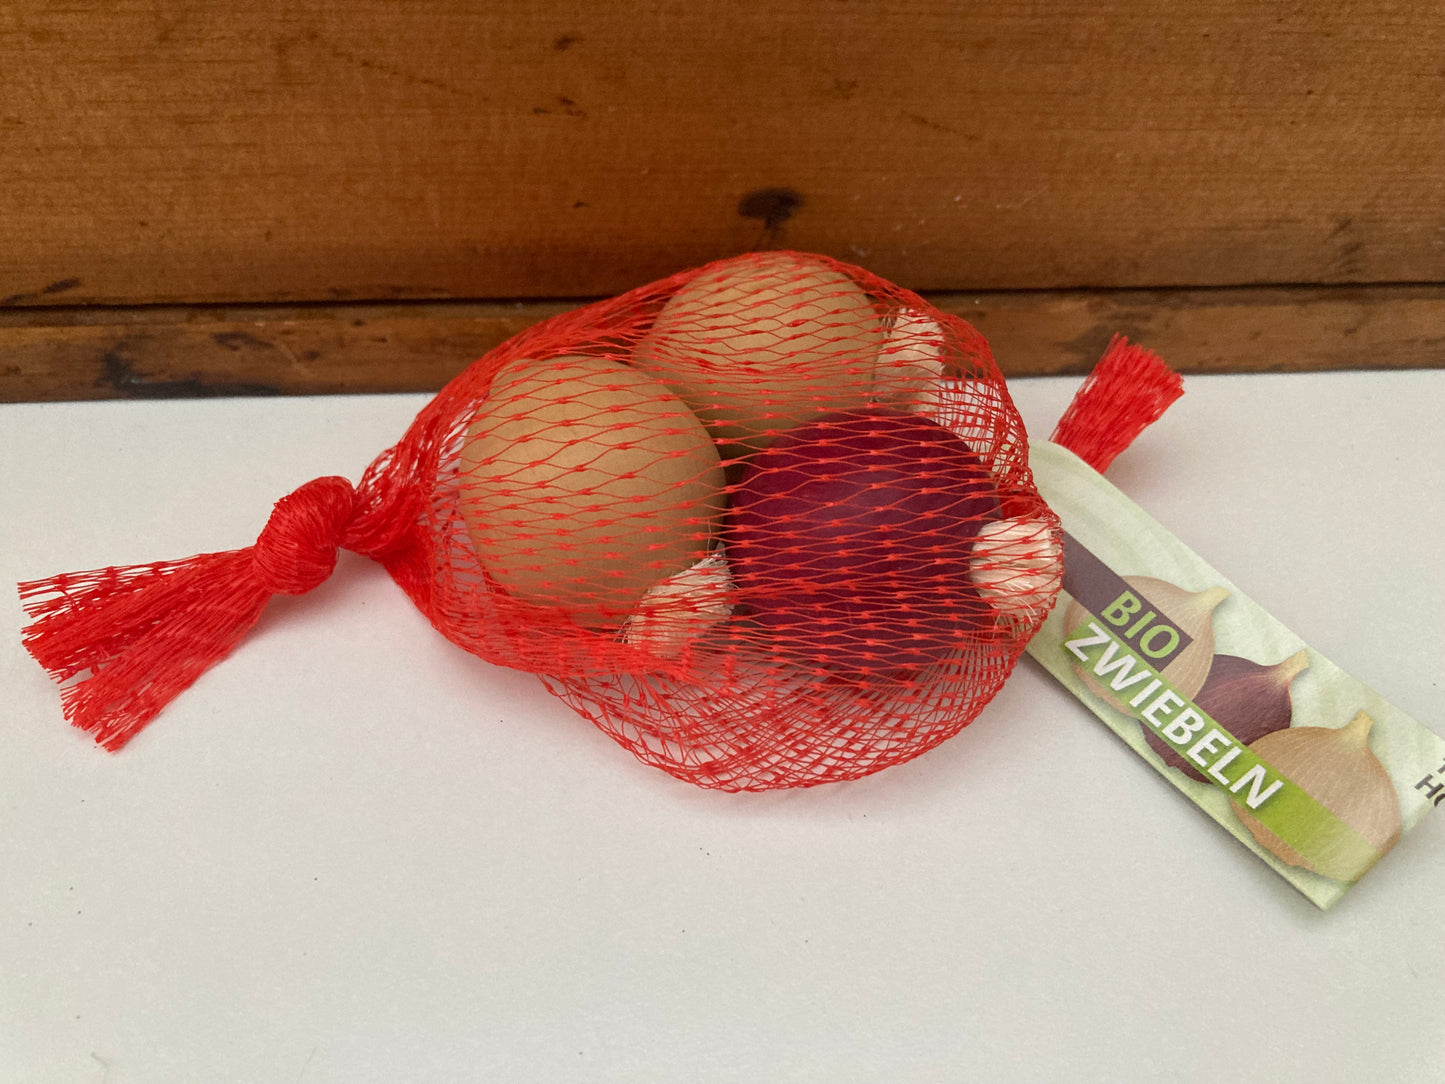 Kitchen Play Food - Wooden ONIONS-IN-A-NET, 4 pieces!